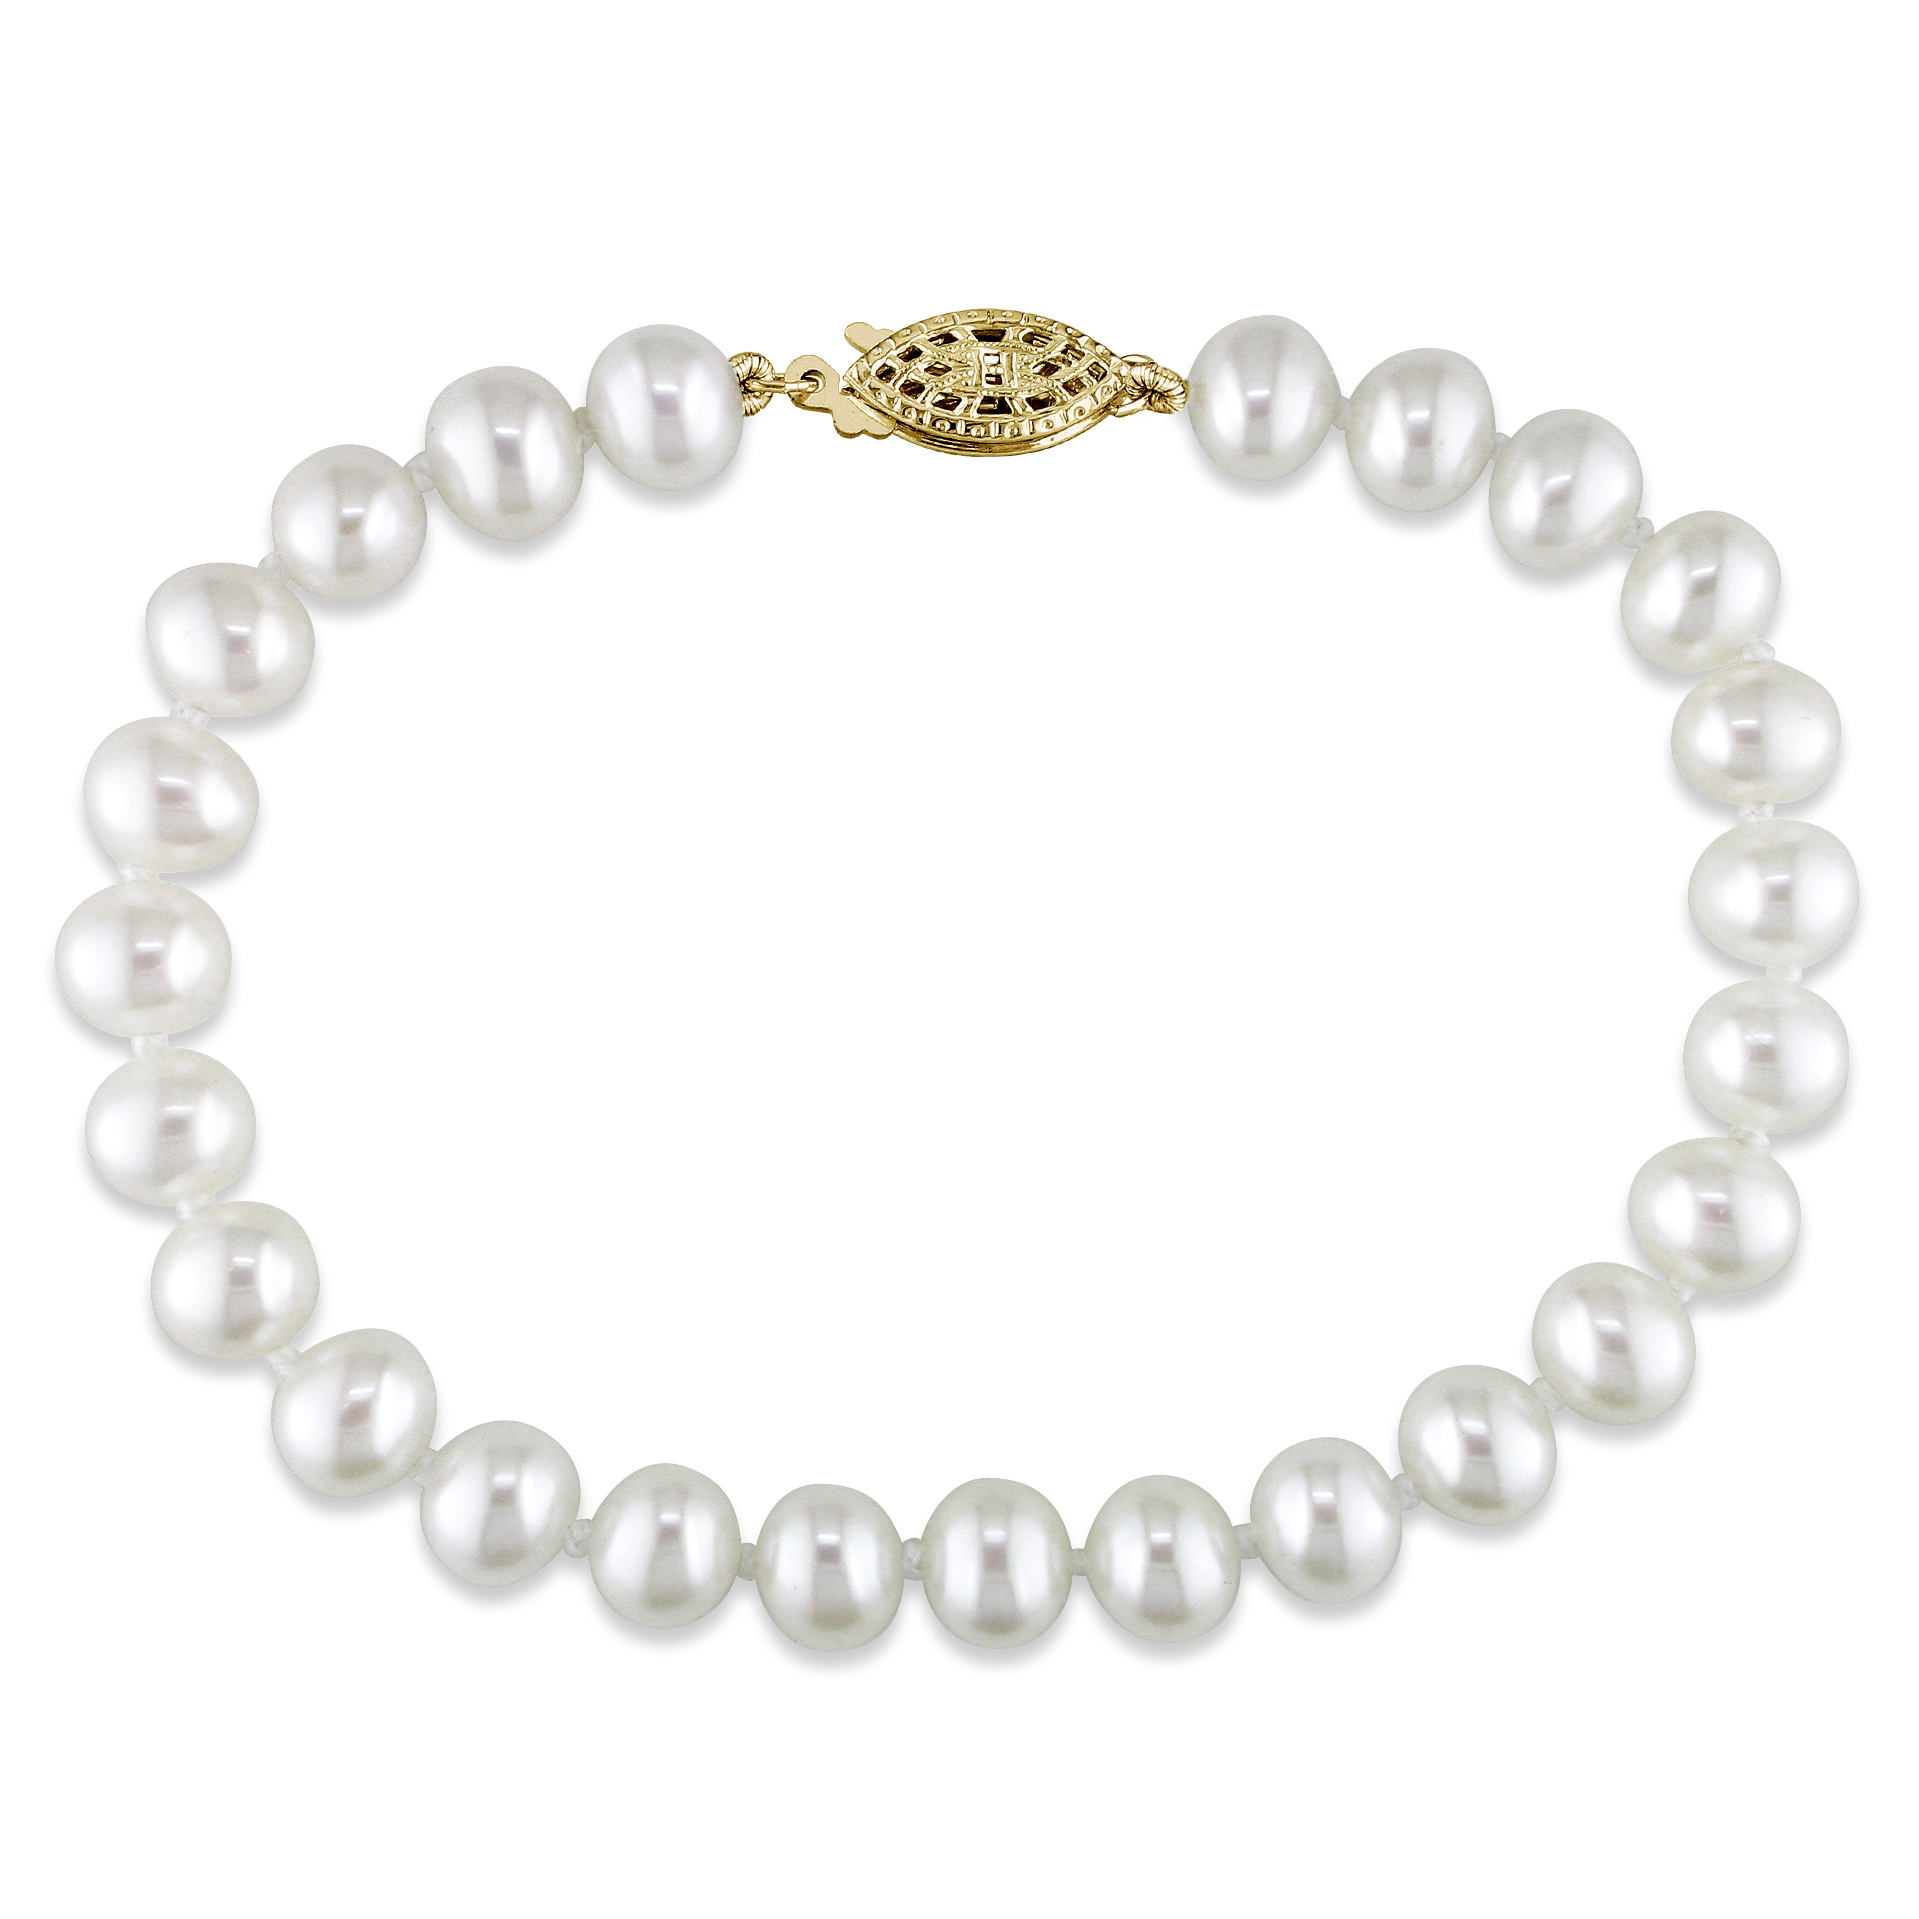 6-7mm Cultured Freshwater Pearl Bracelet with 14K Yellow Gold Clasp